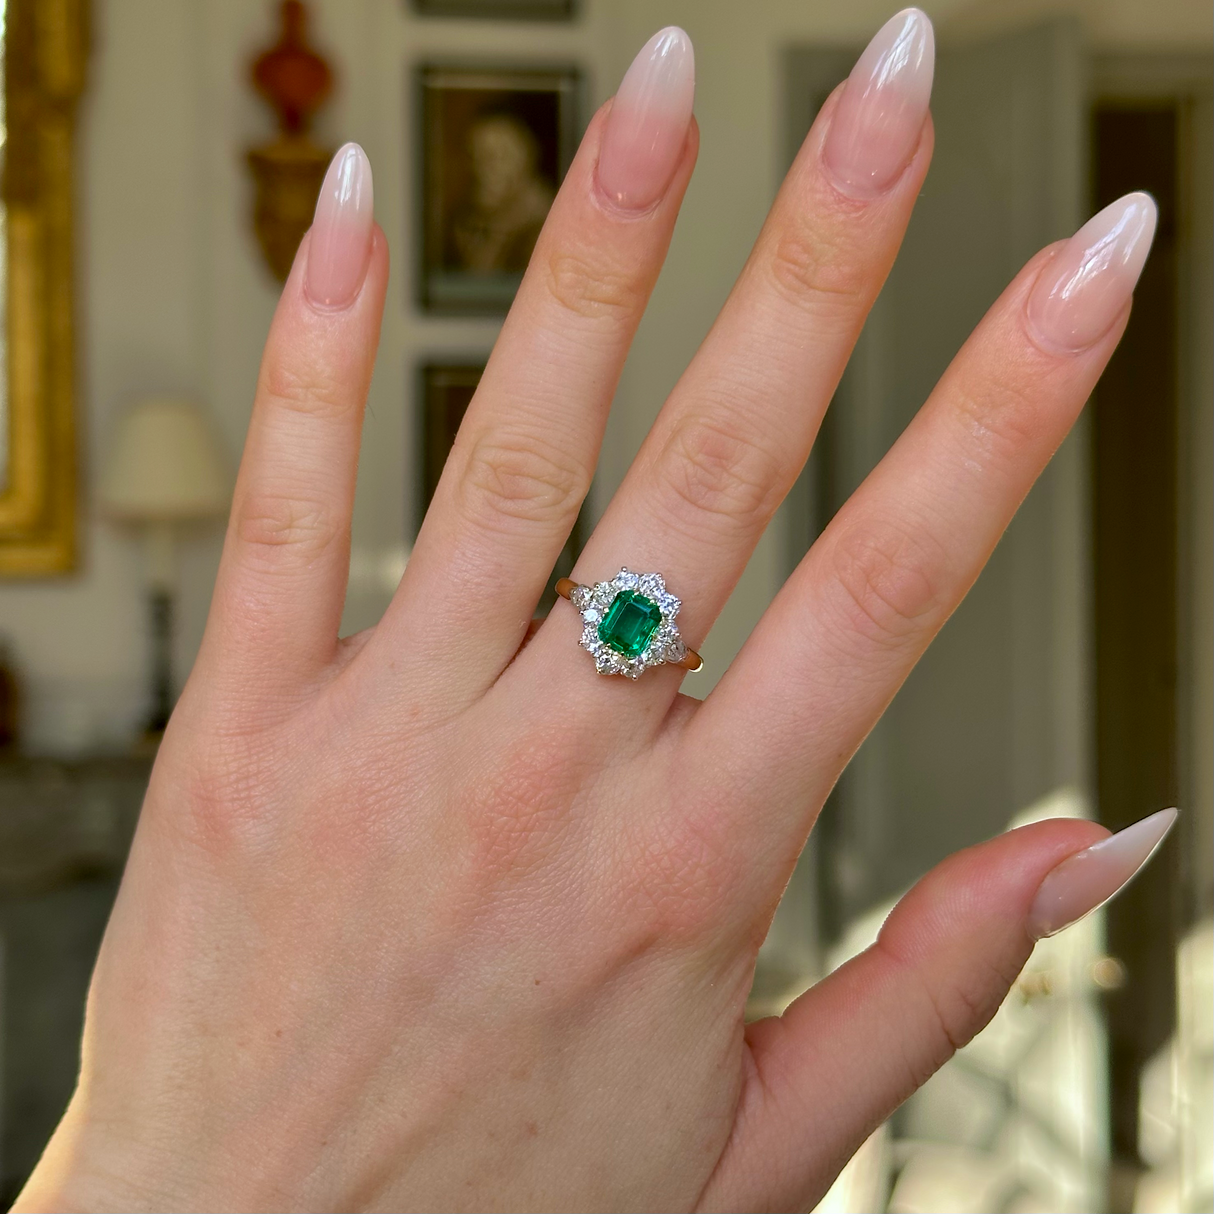 Antique, Edwardian Emerald and Diamond Engagement Ring, 18ct Yellow Gold and Platinum worn on hand